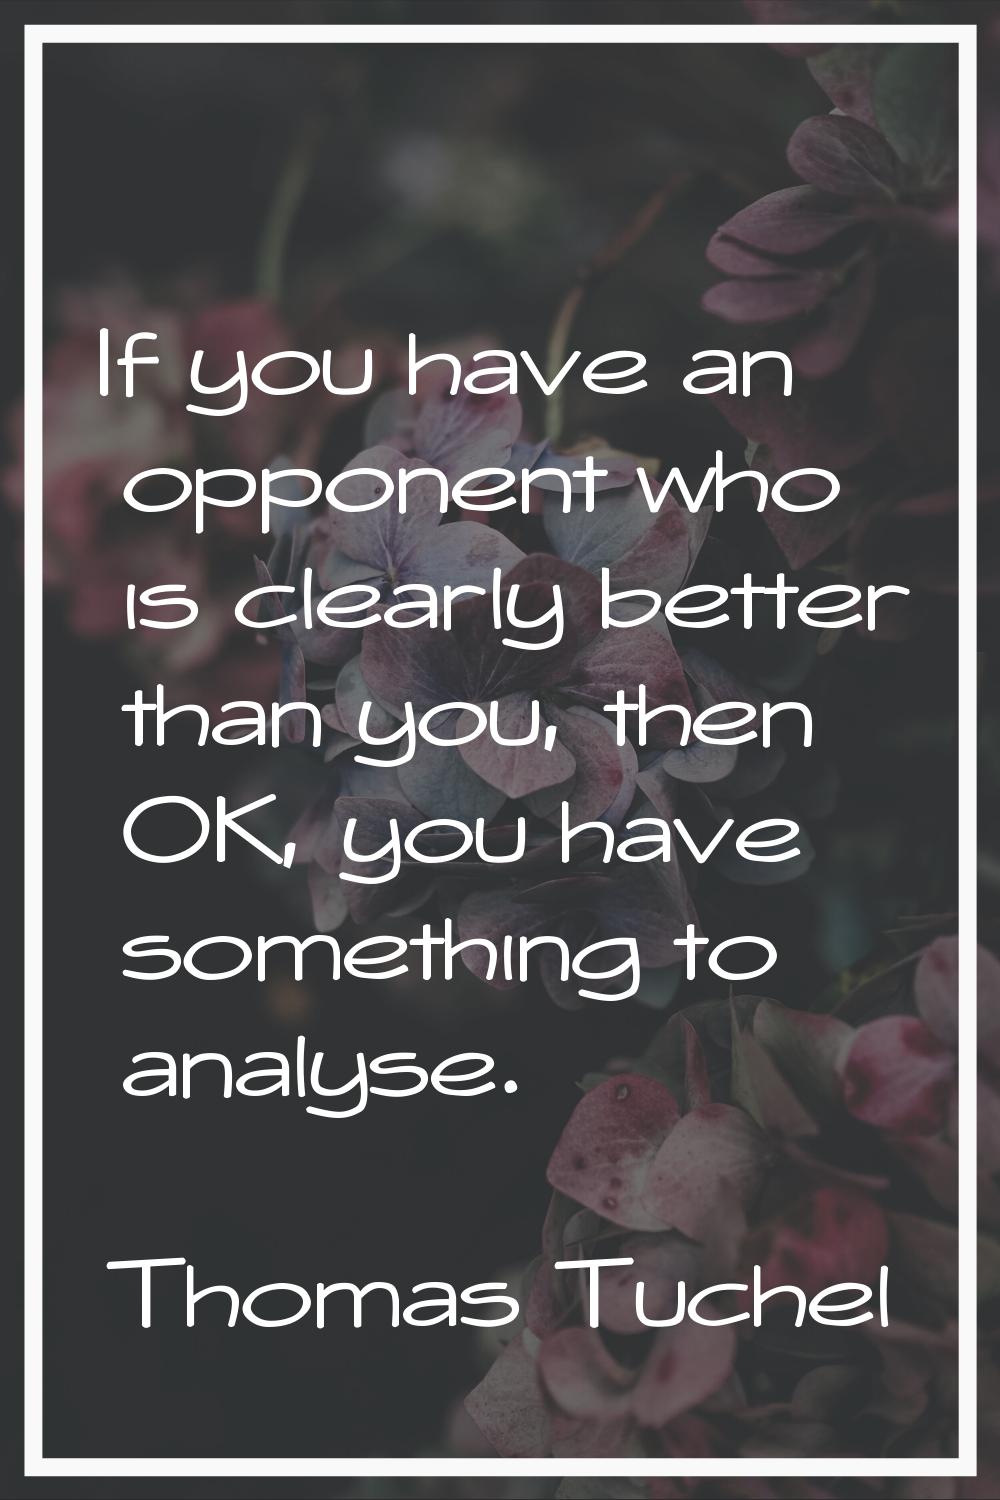 If you have an opponent who is clearly better than you, then OK, you have something to analyse.